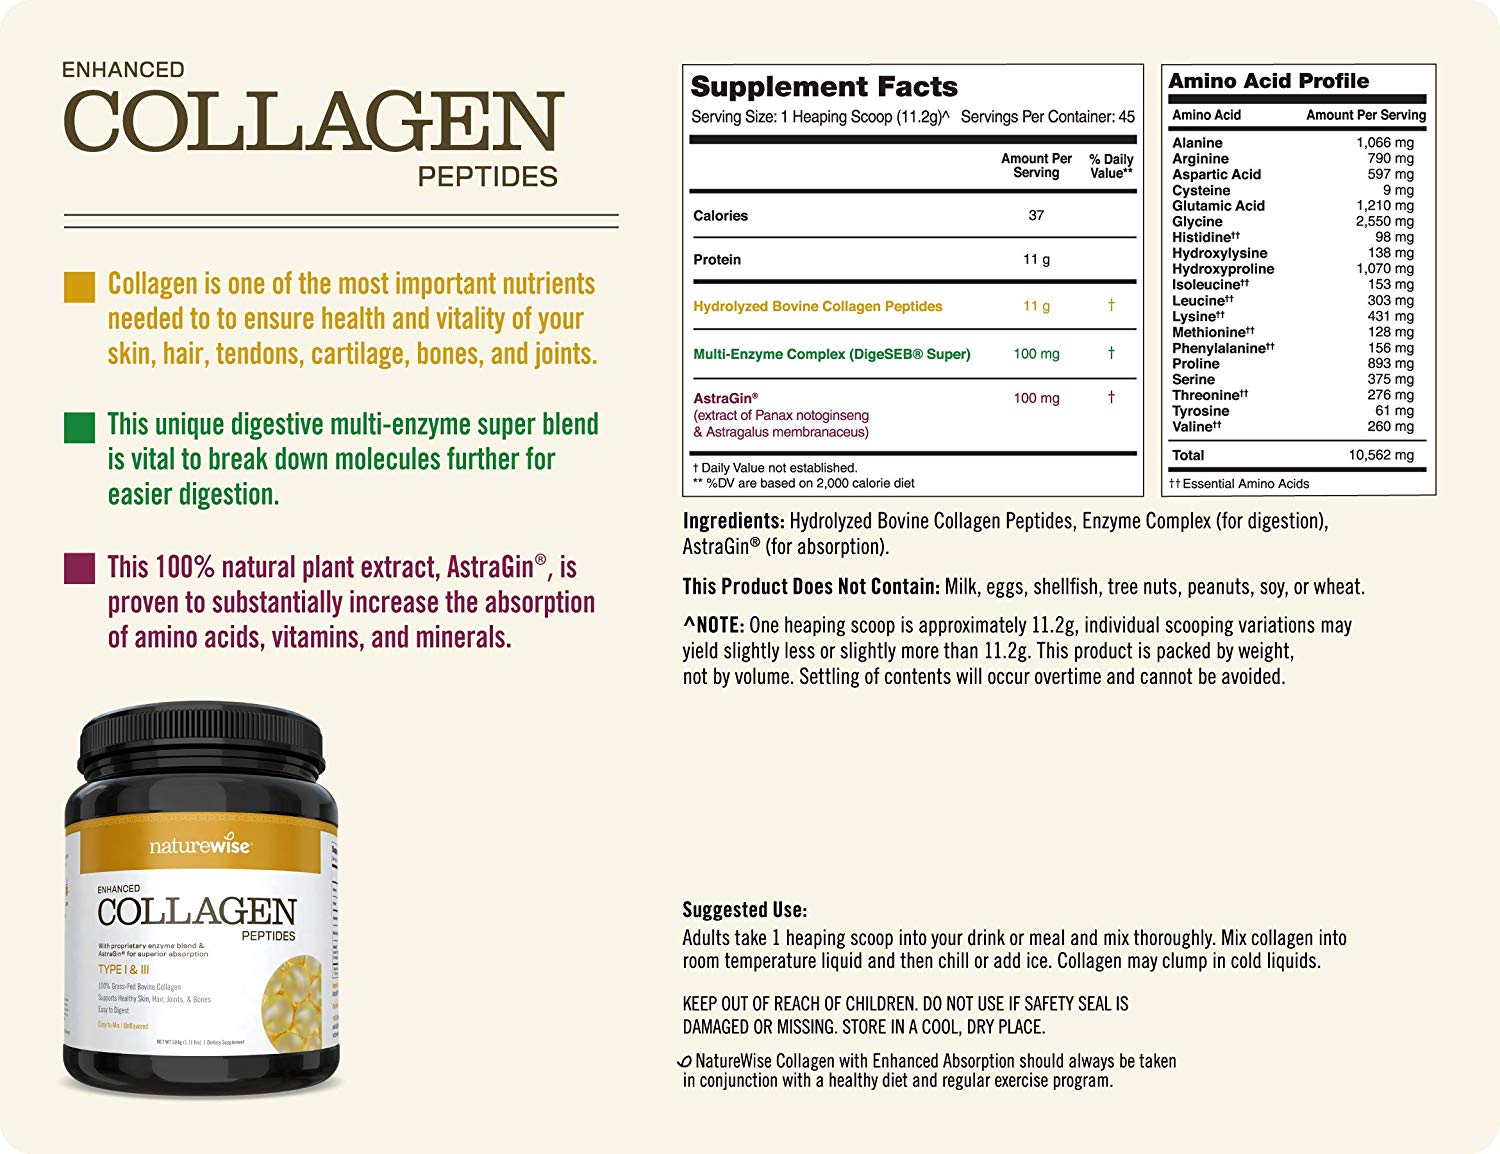 Enhanced Collagen Peptides Sup Facts